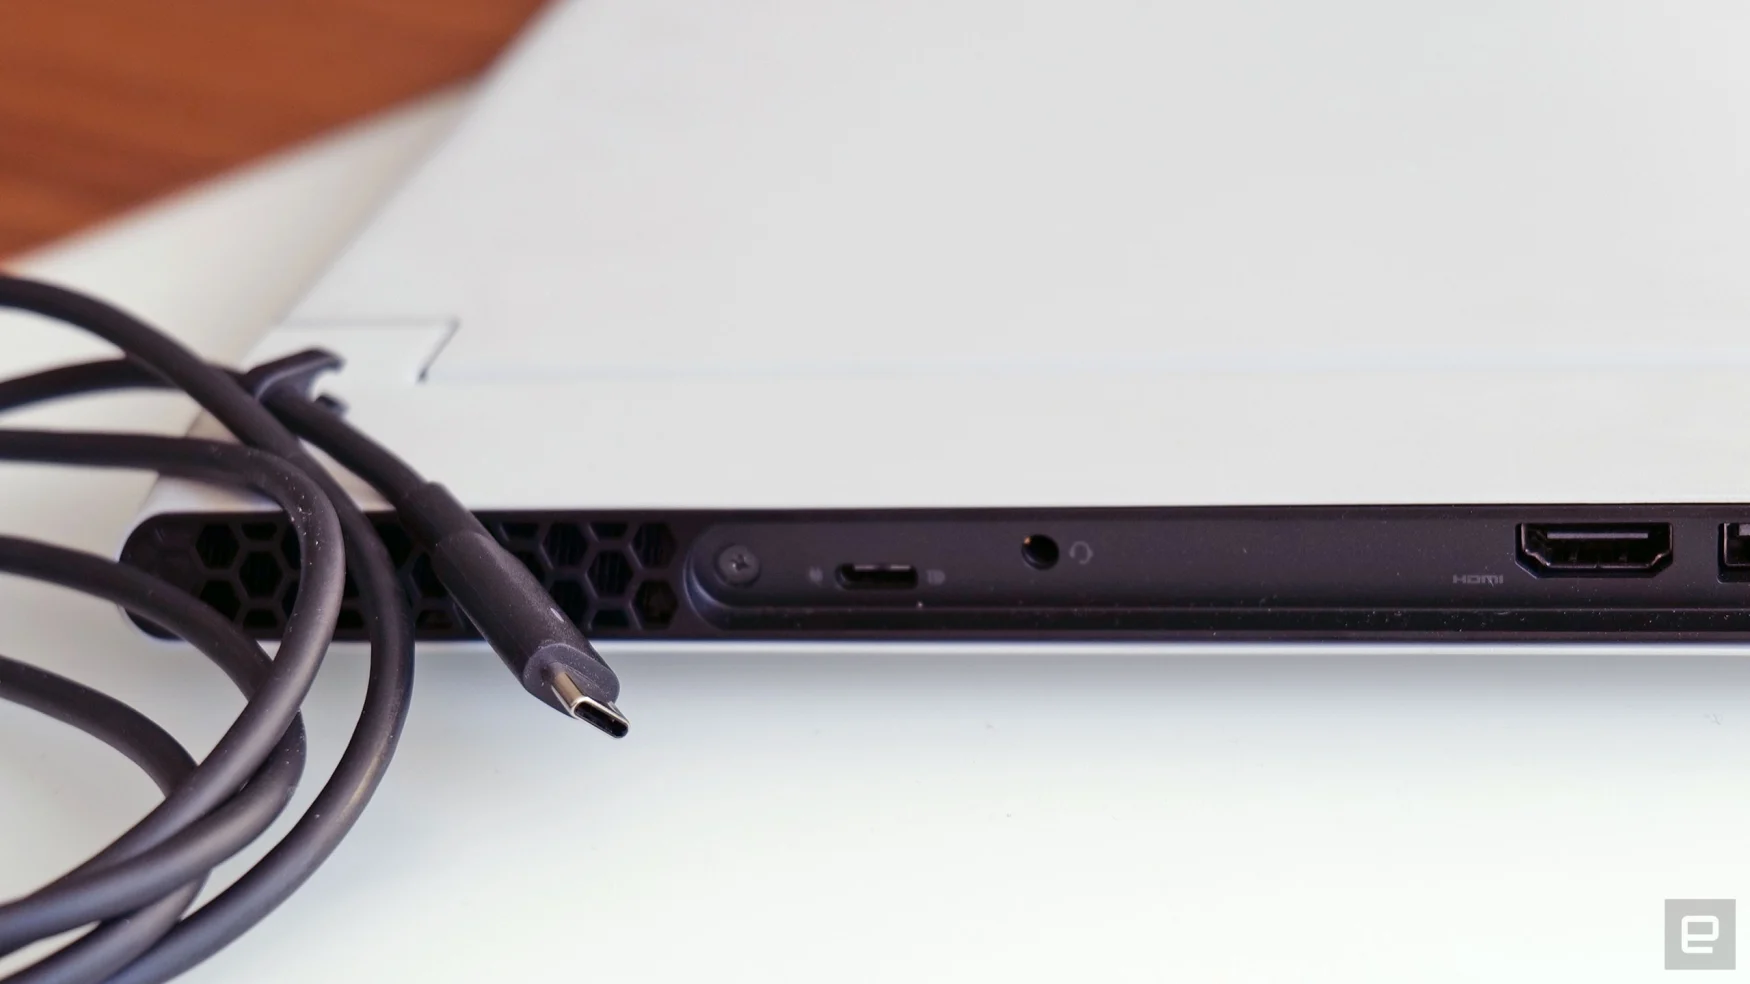 Unlike a lot of larger gaming laptops, the x14 supports USB-C charging by default. 